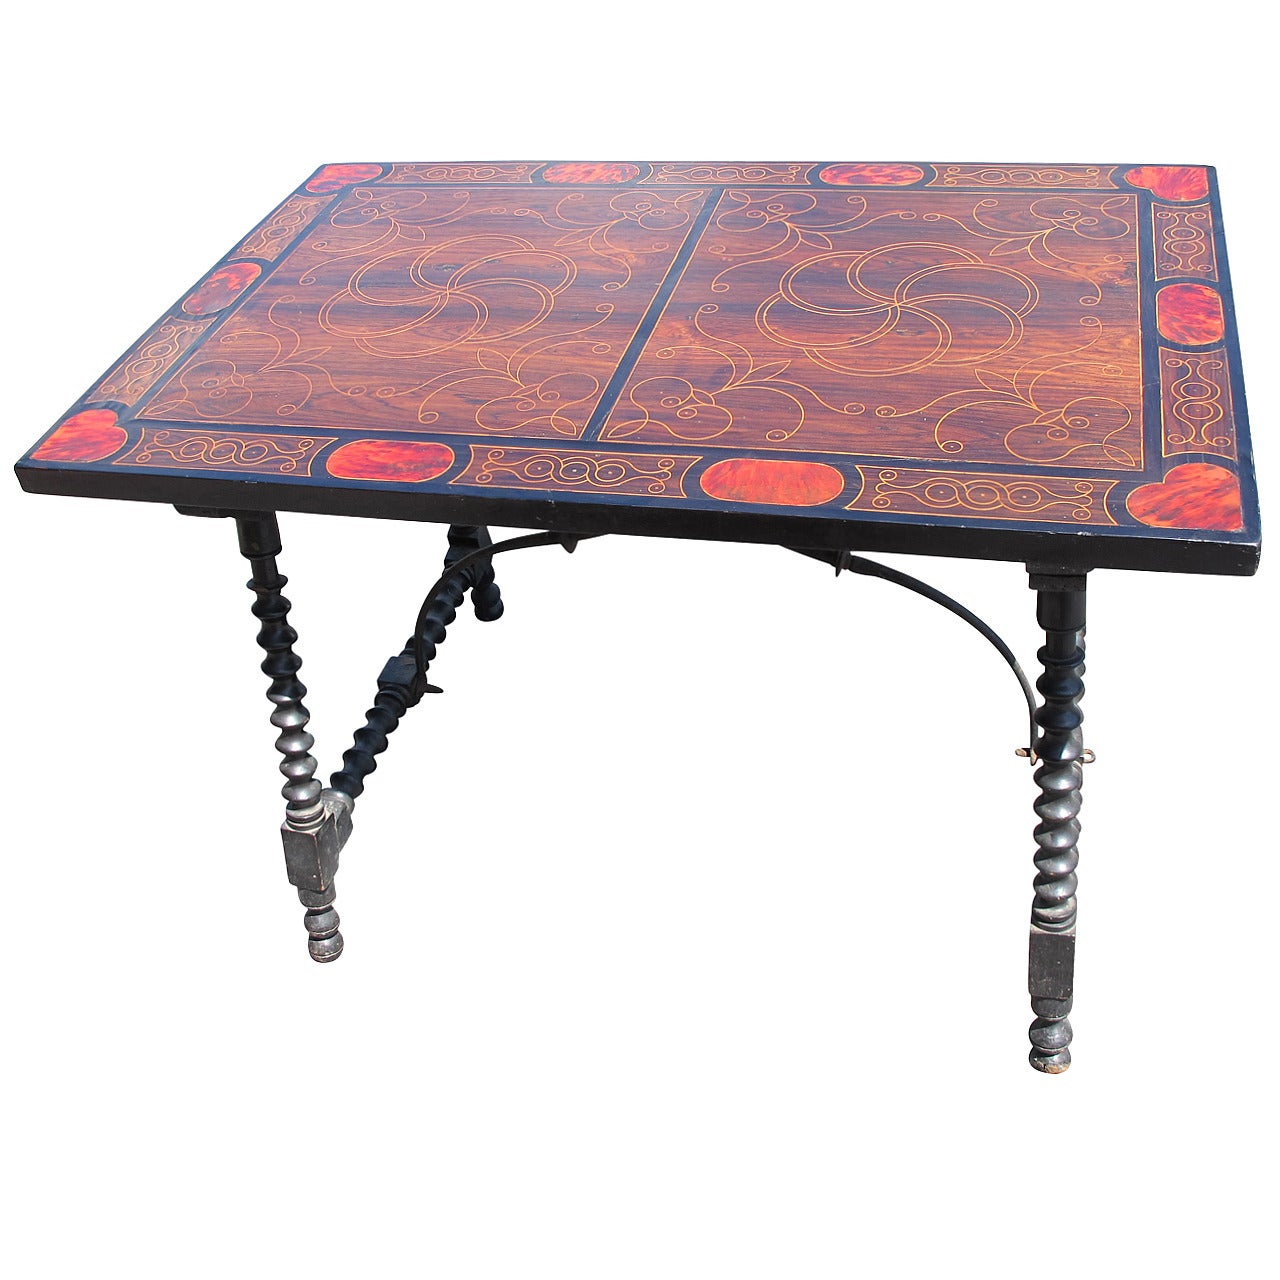 Stunning 19th Century Spanish Inlay Low Coffee Table For Sale